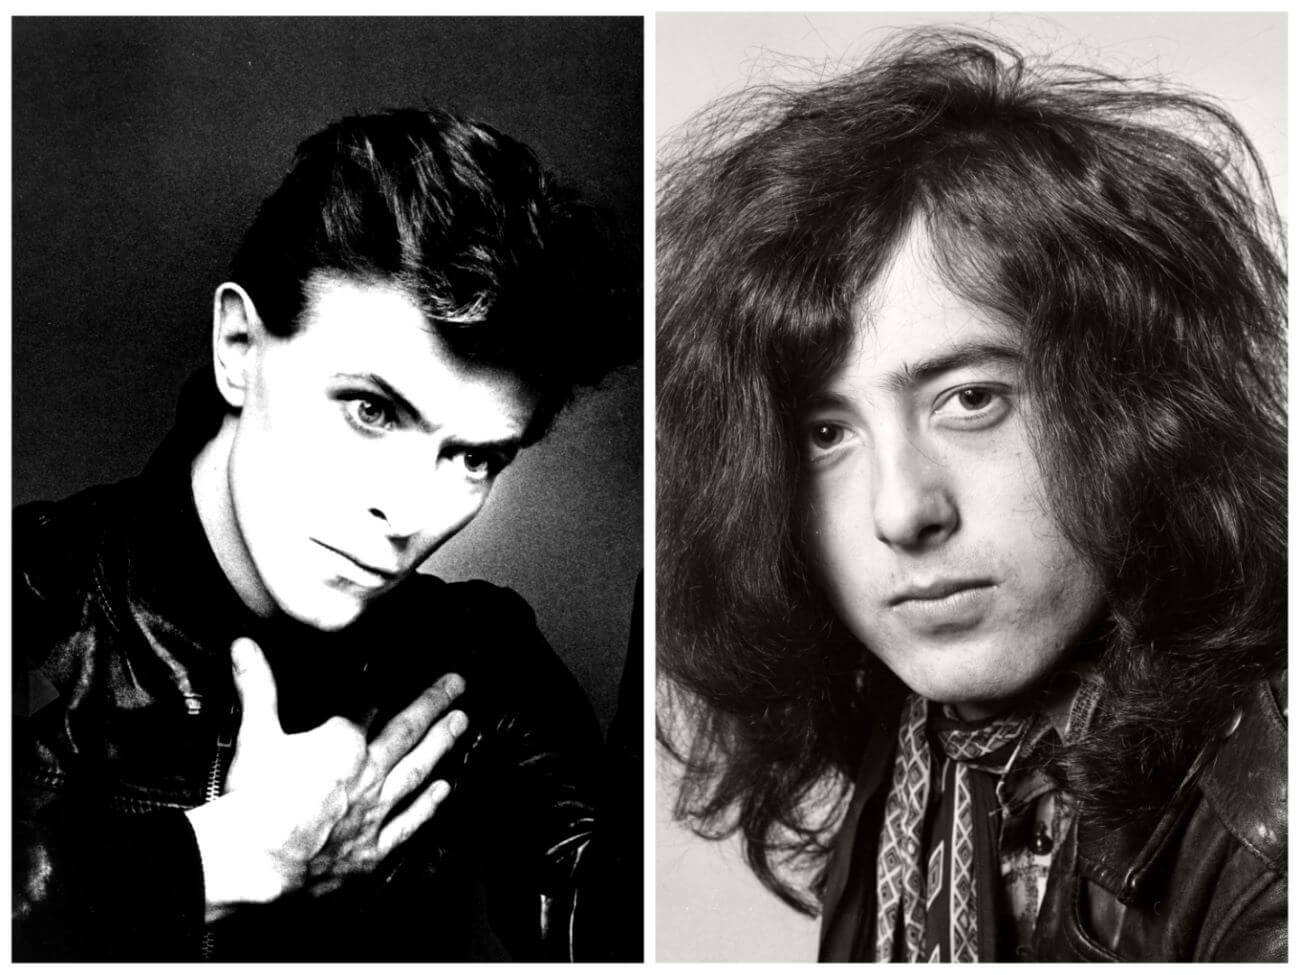 A black and white picture of David Bowie with his hand on his chest. Jimmy Page has a scarf tied around his neck.